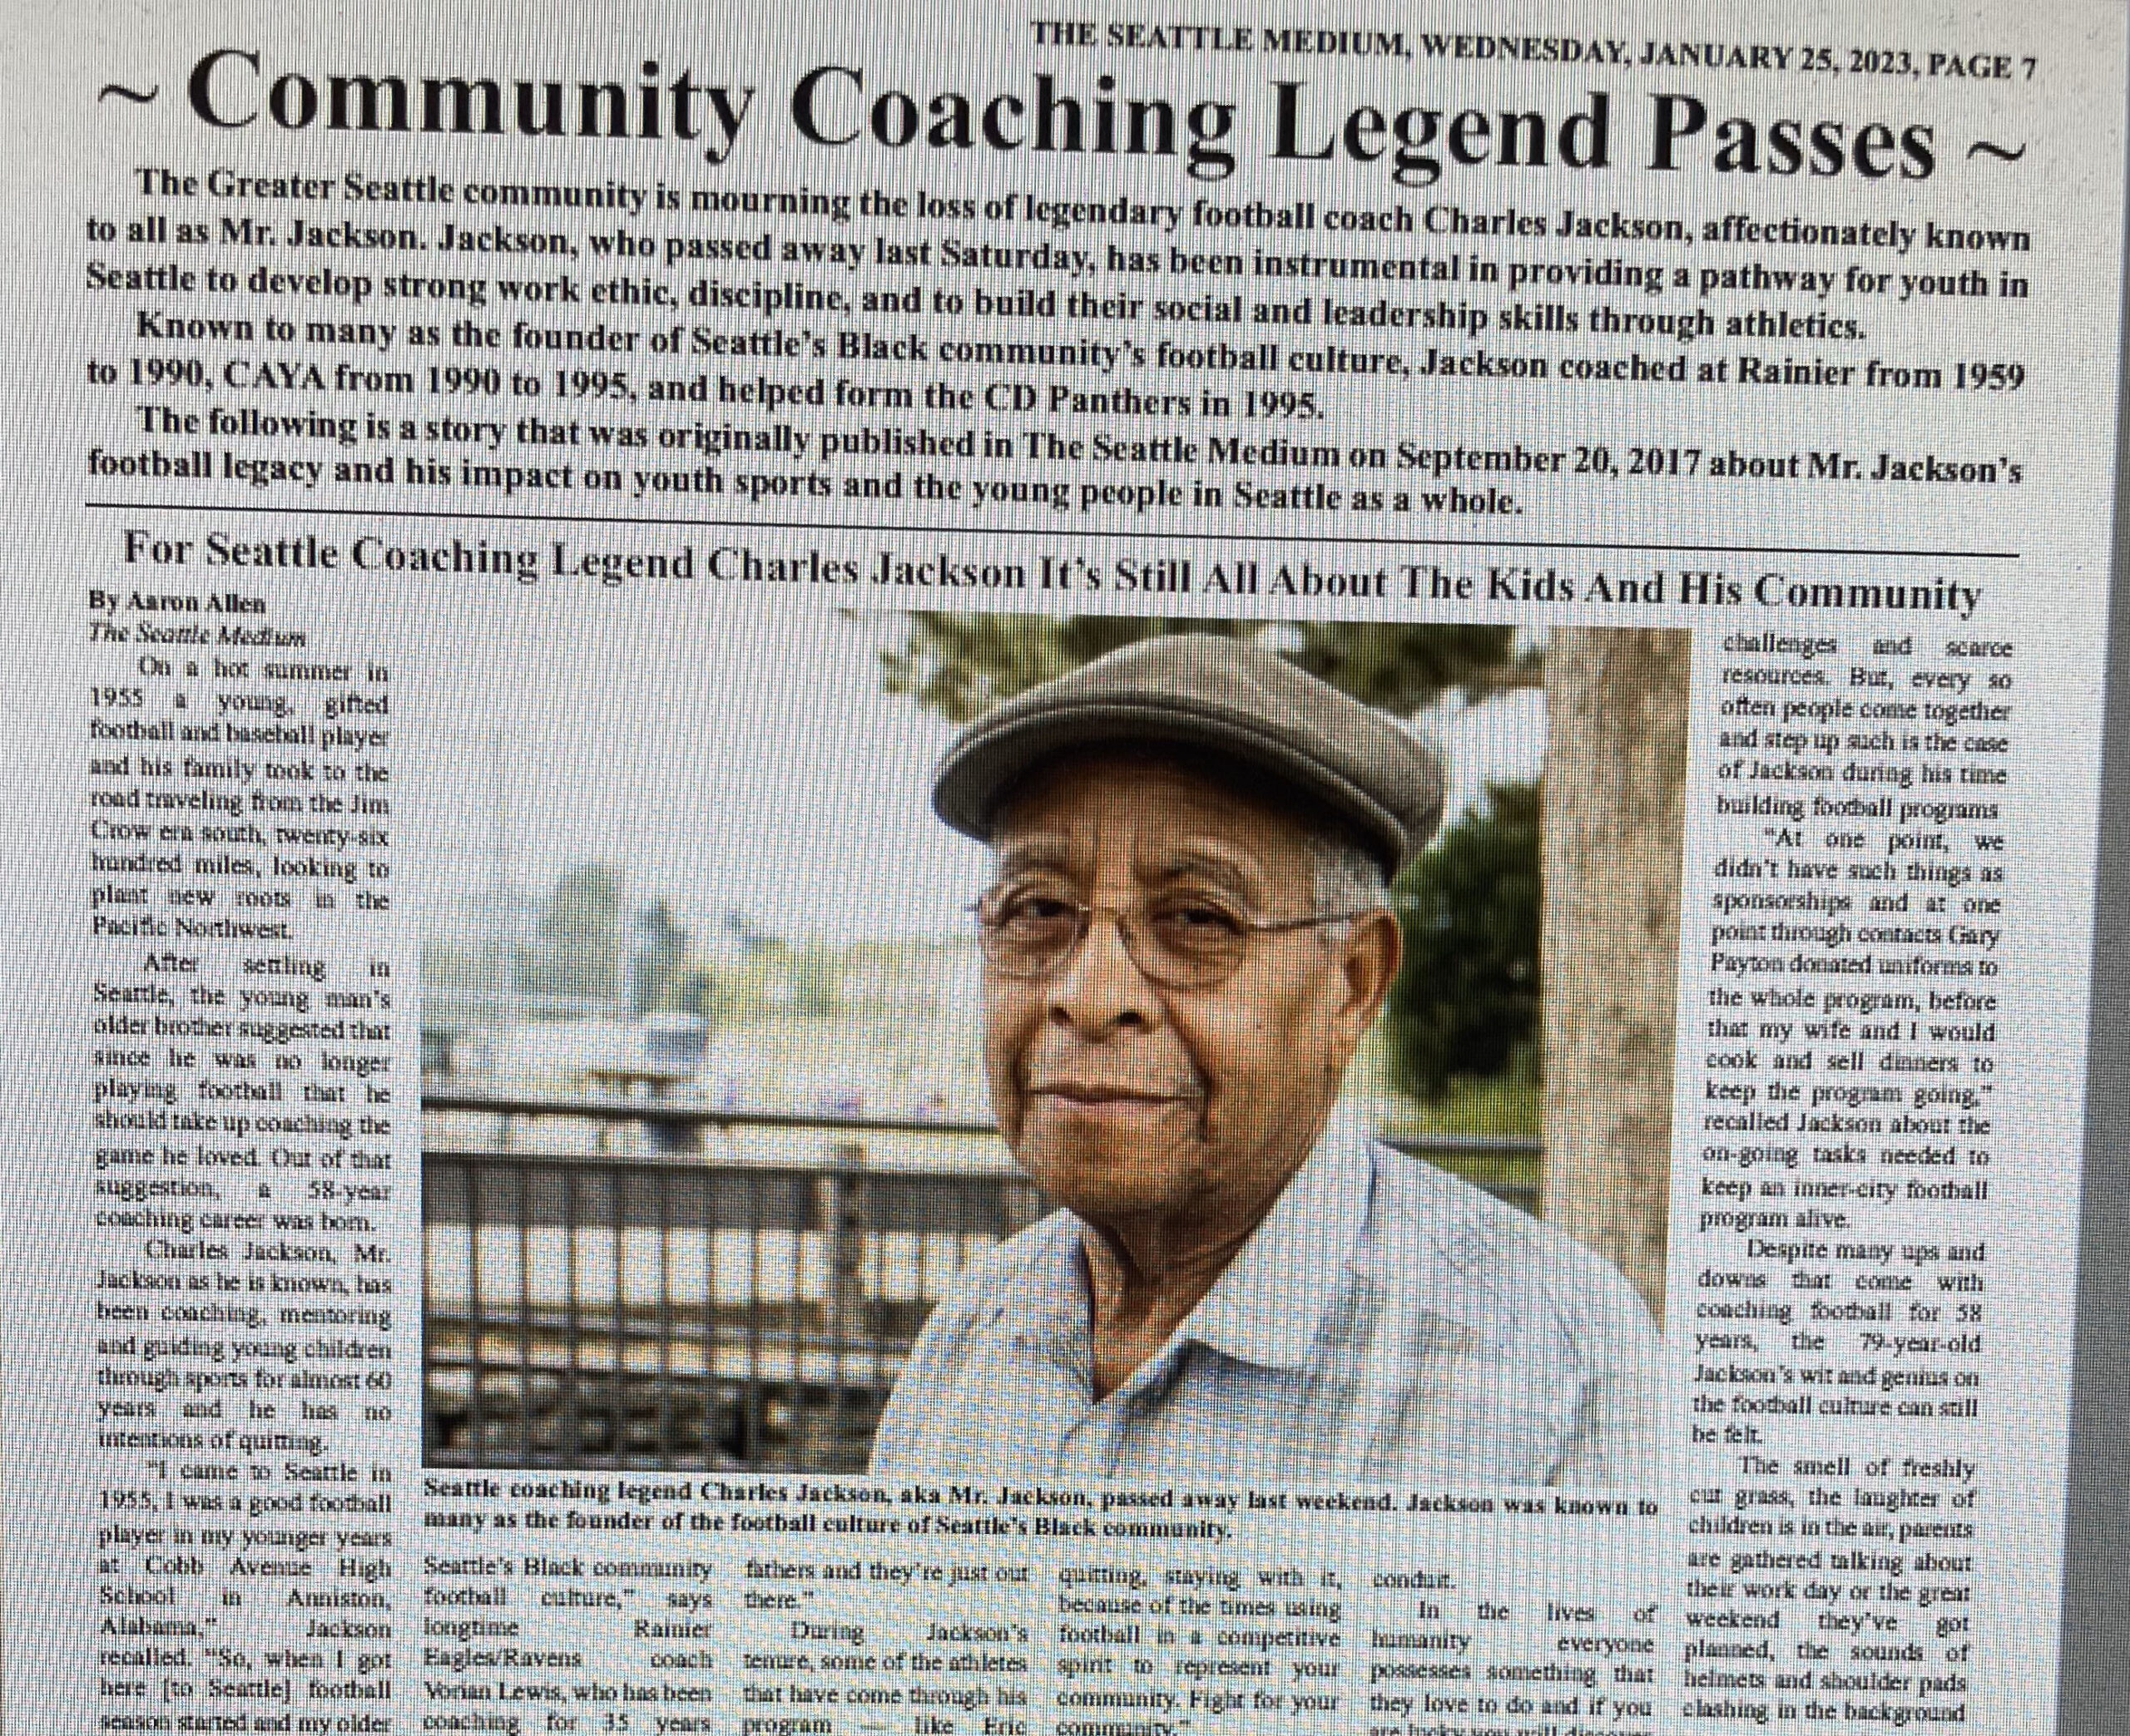 A newspaper clipping with photo of an older Black man wearing a flat cap and glasses and headline that says "Community Coaching Legend Passes."